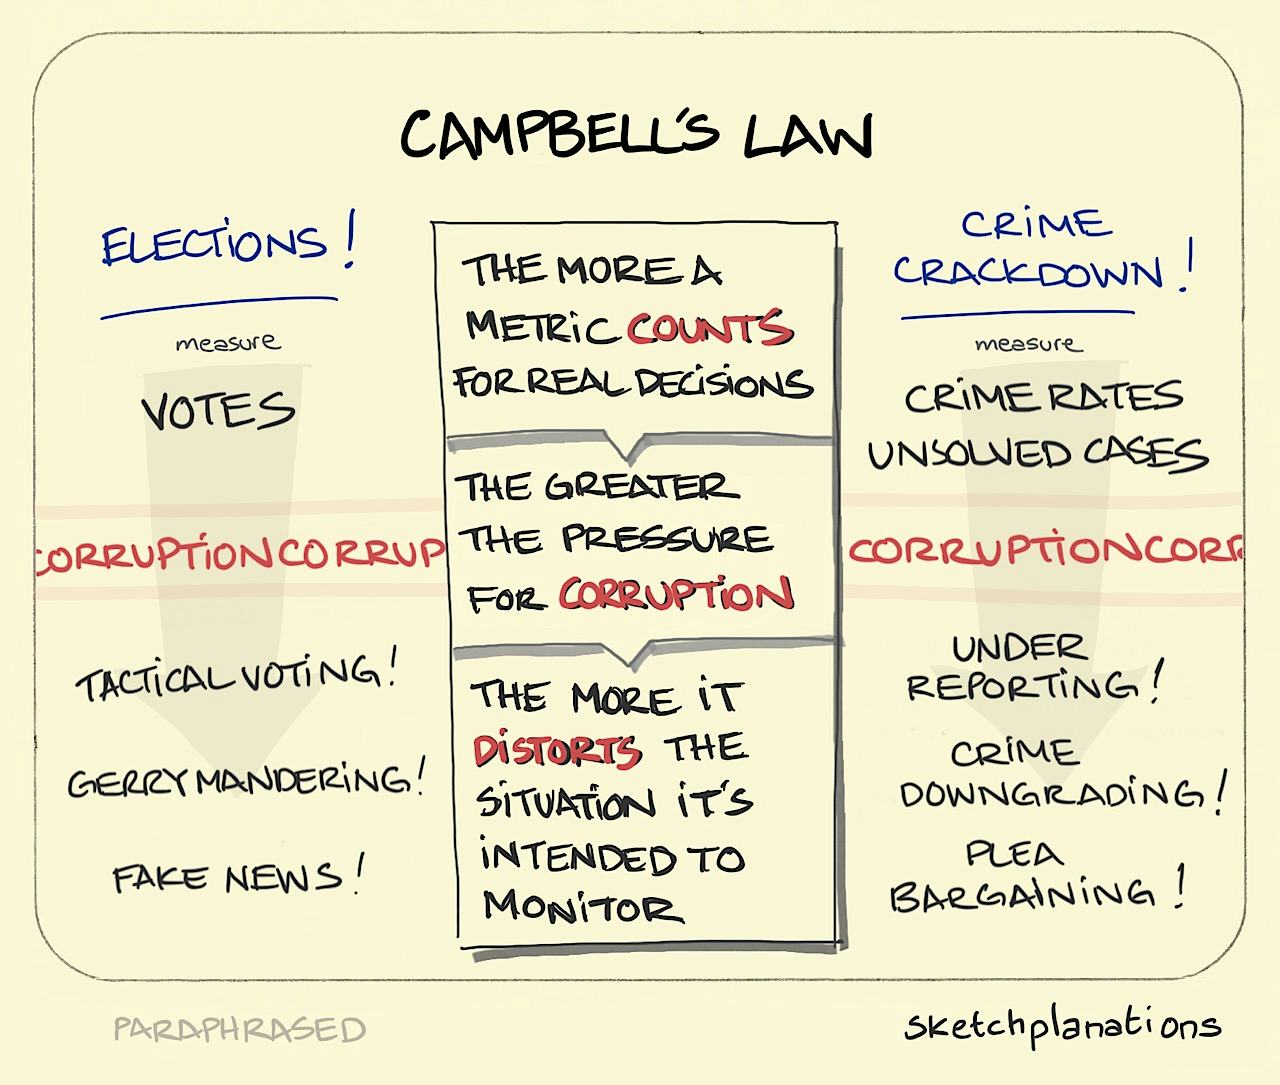 Campbell's law illustrated with examples from elections and leading to fake news and a crackdown on crime distorting how it is reported and measured